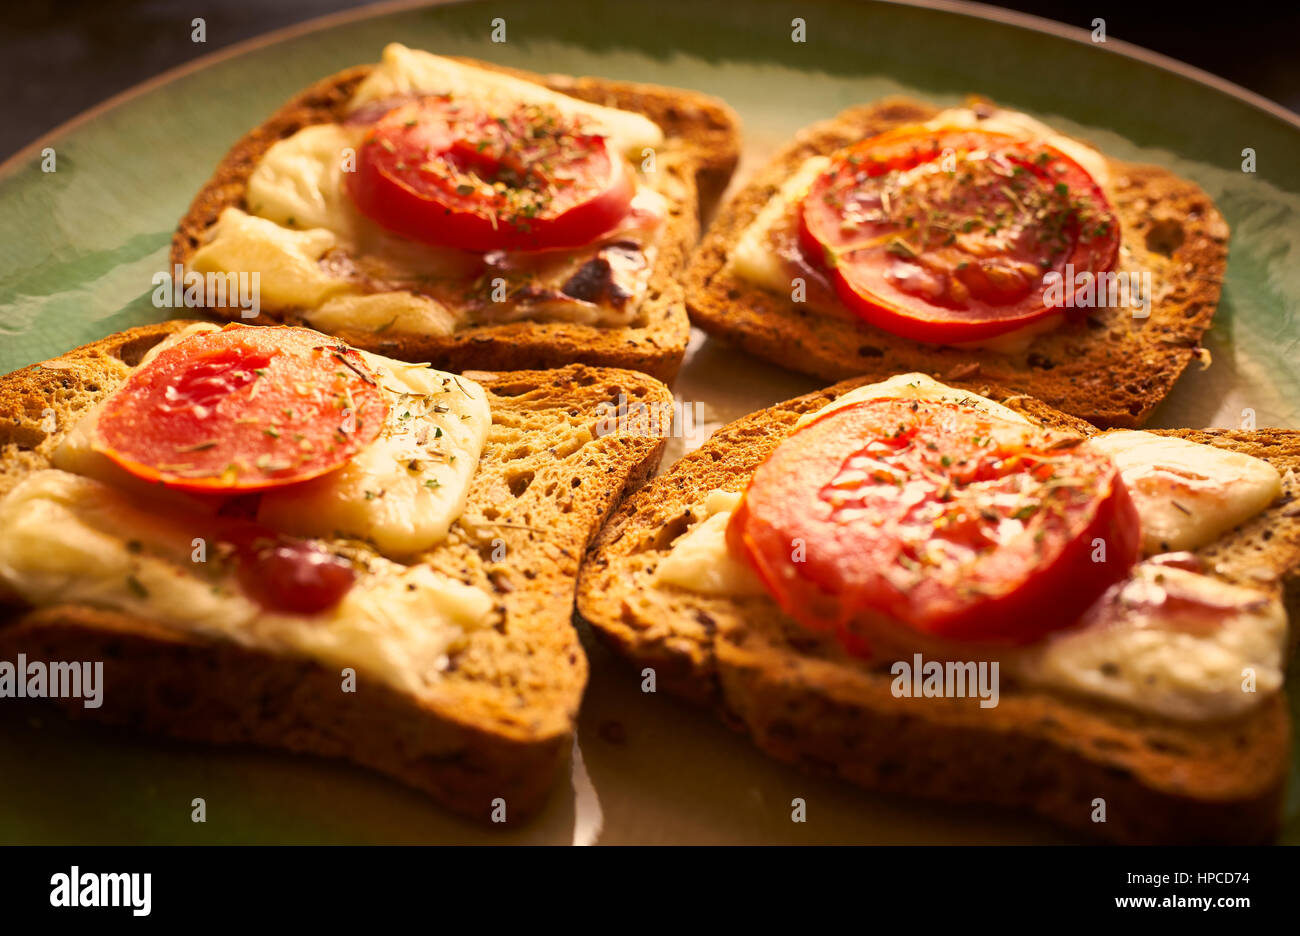 Melted cheese on toast with sliced tomato and herbs Stock Photo